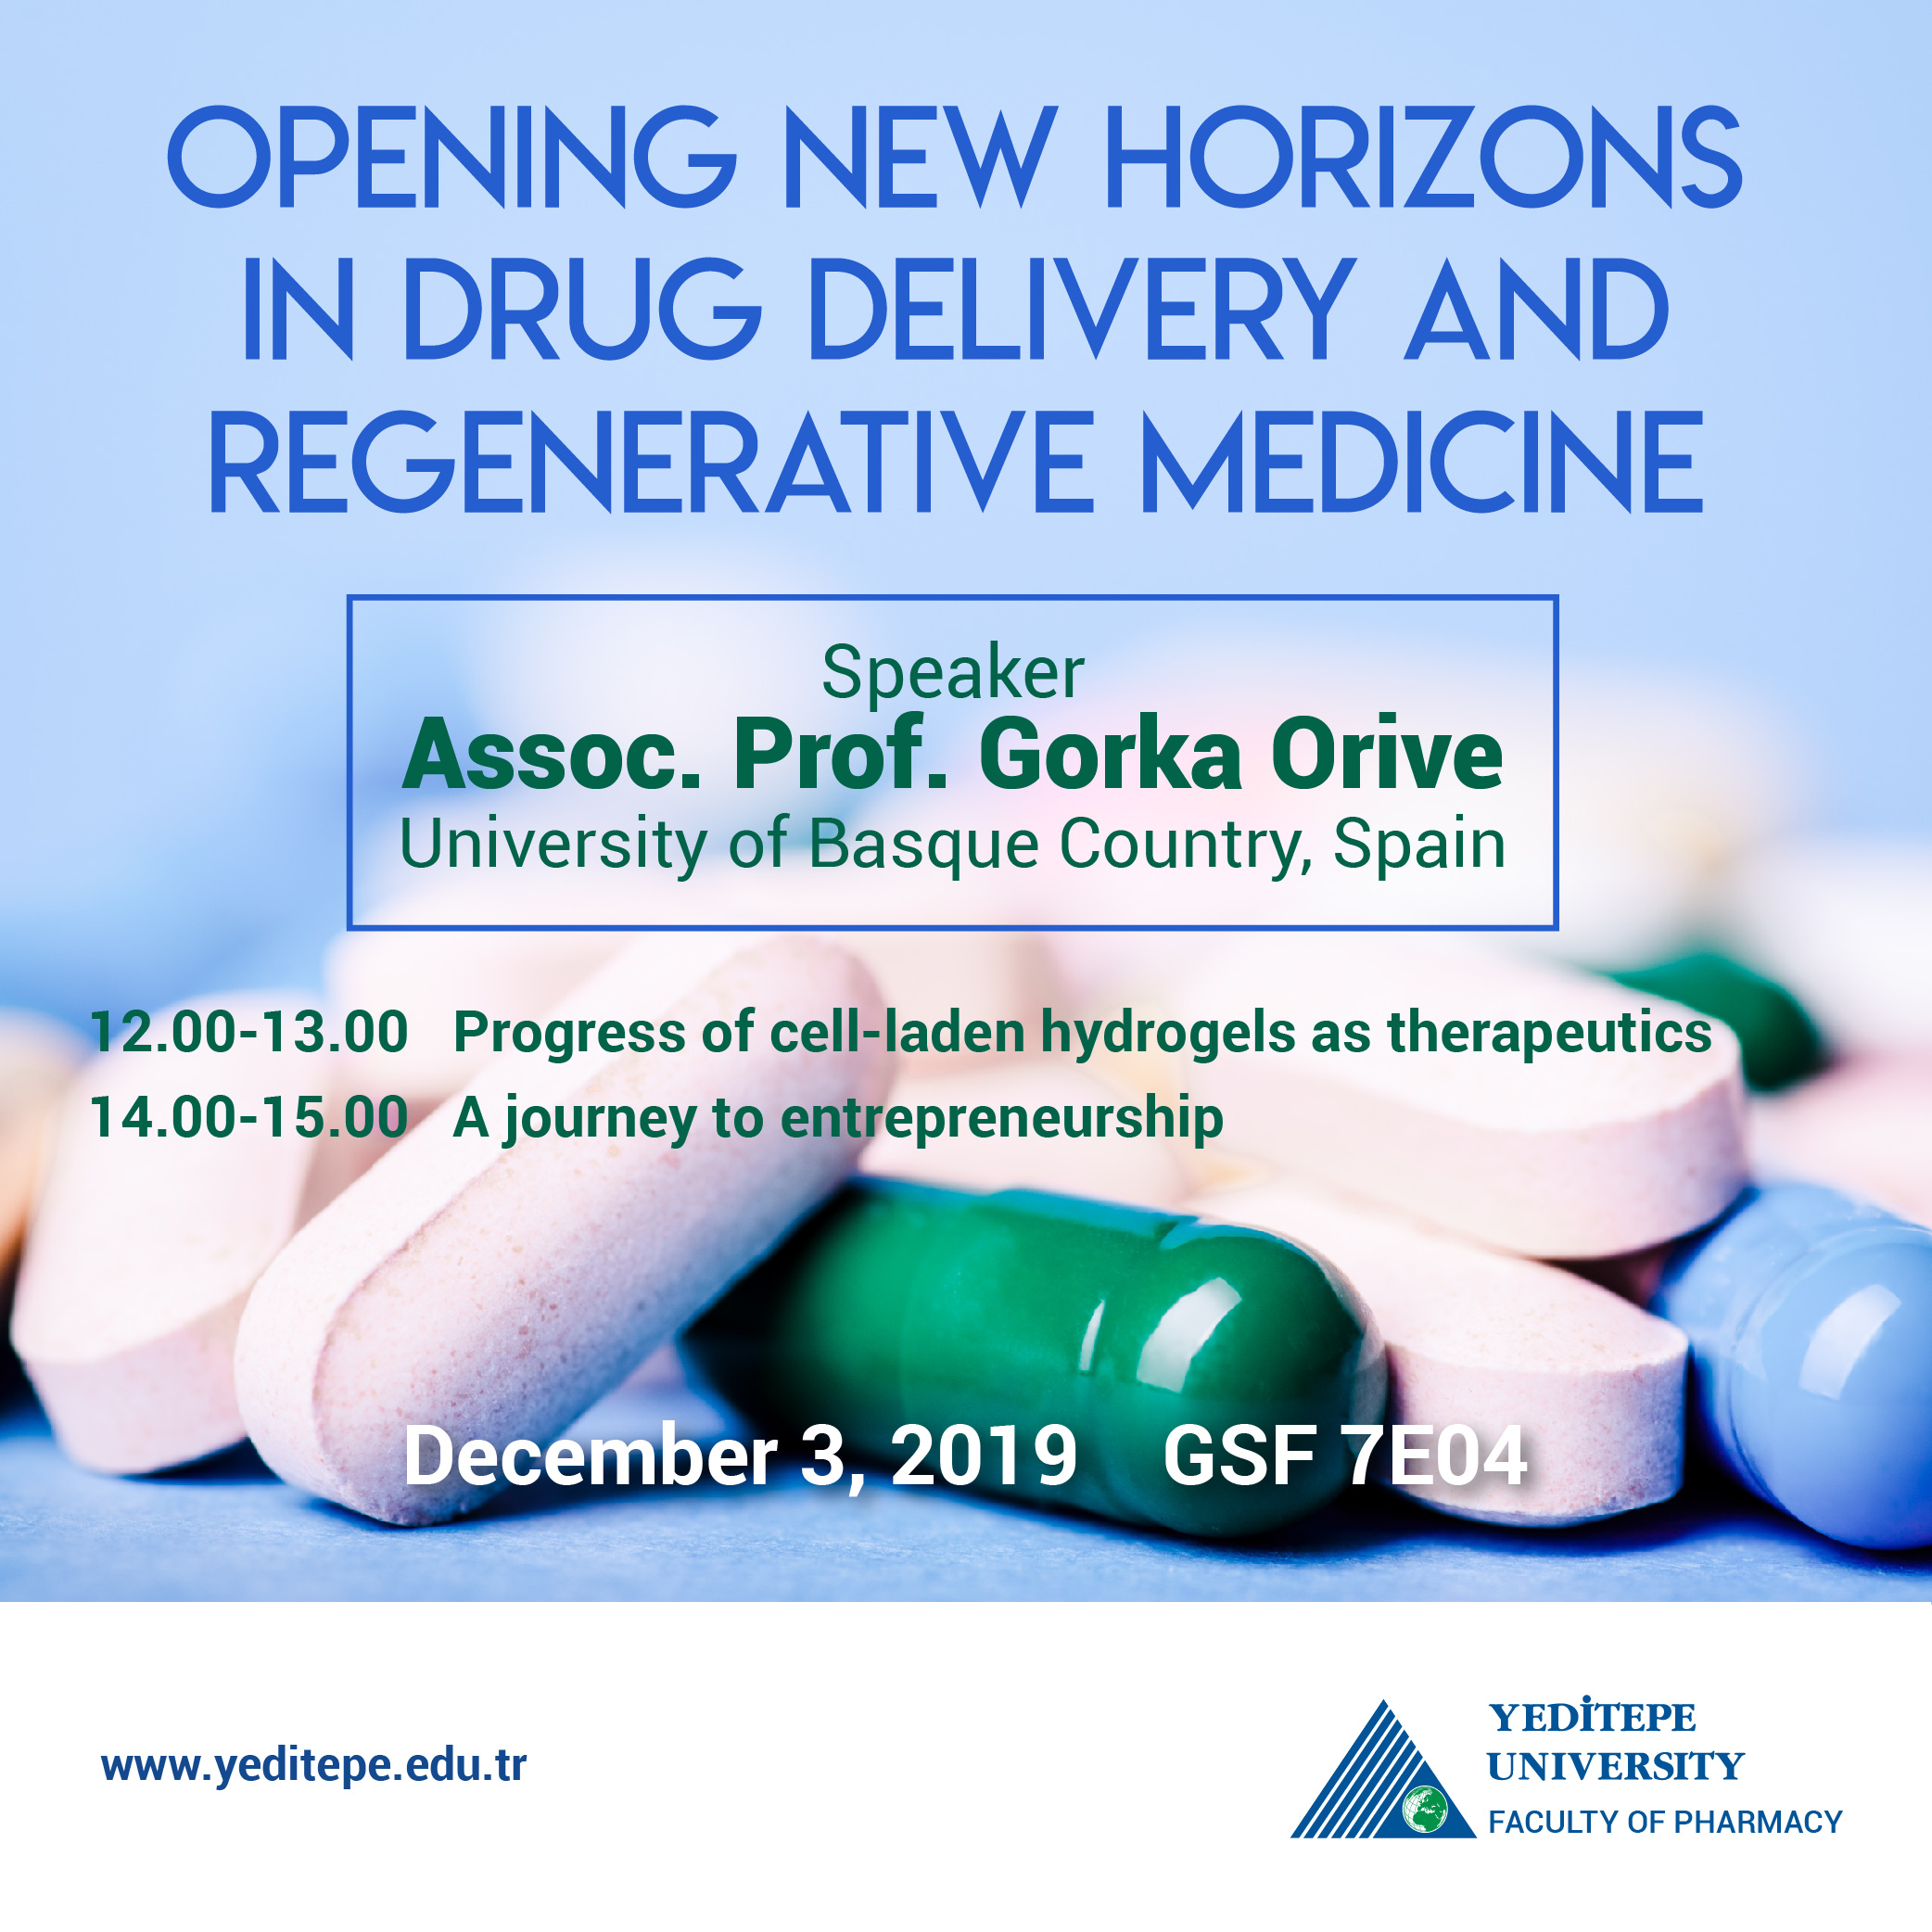 Opening New Horizons in Drug Delivery and Regenerative Medicine